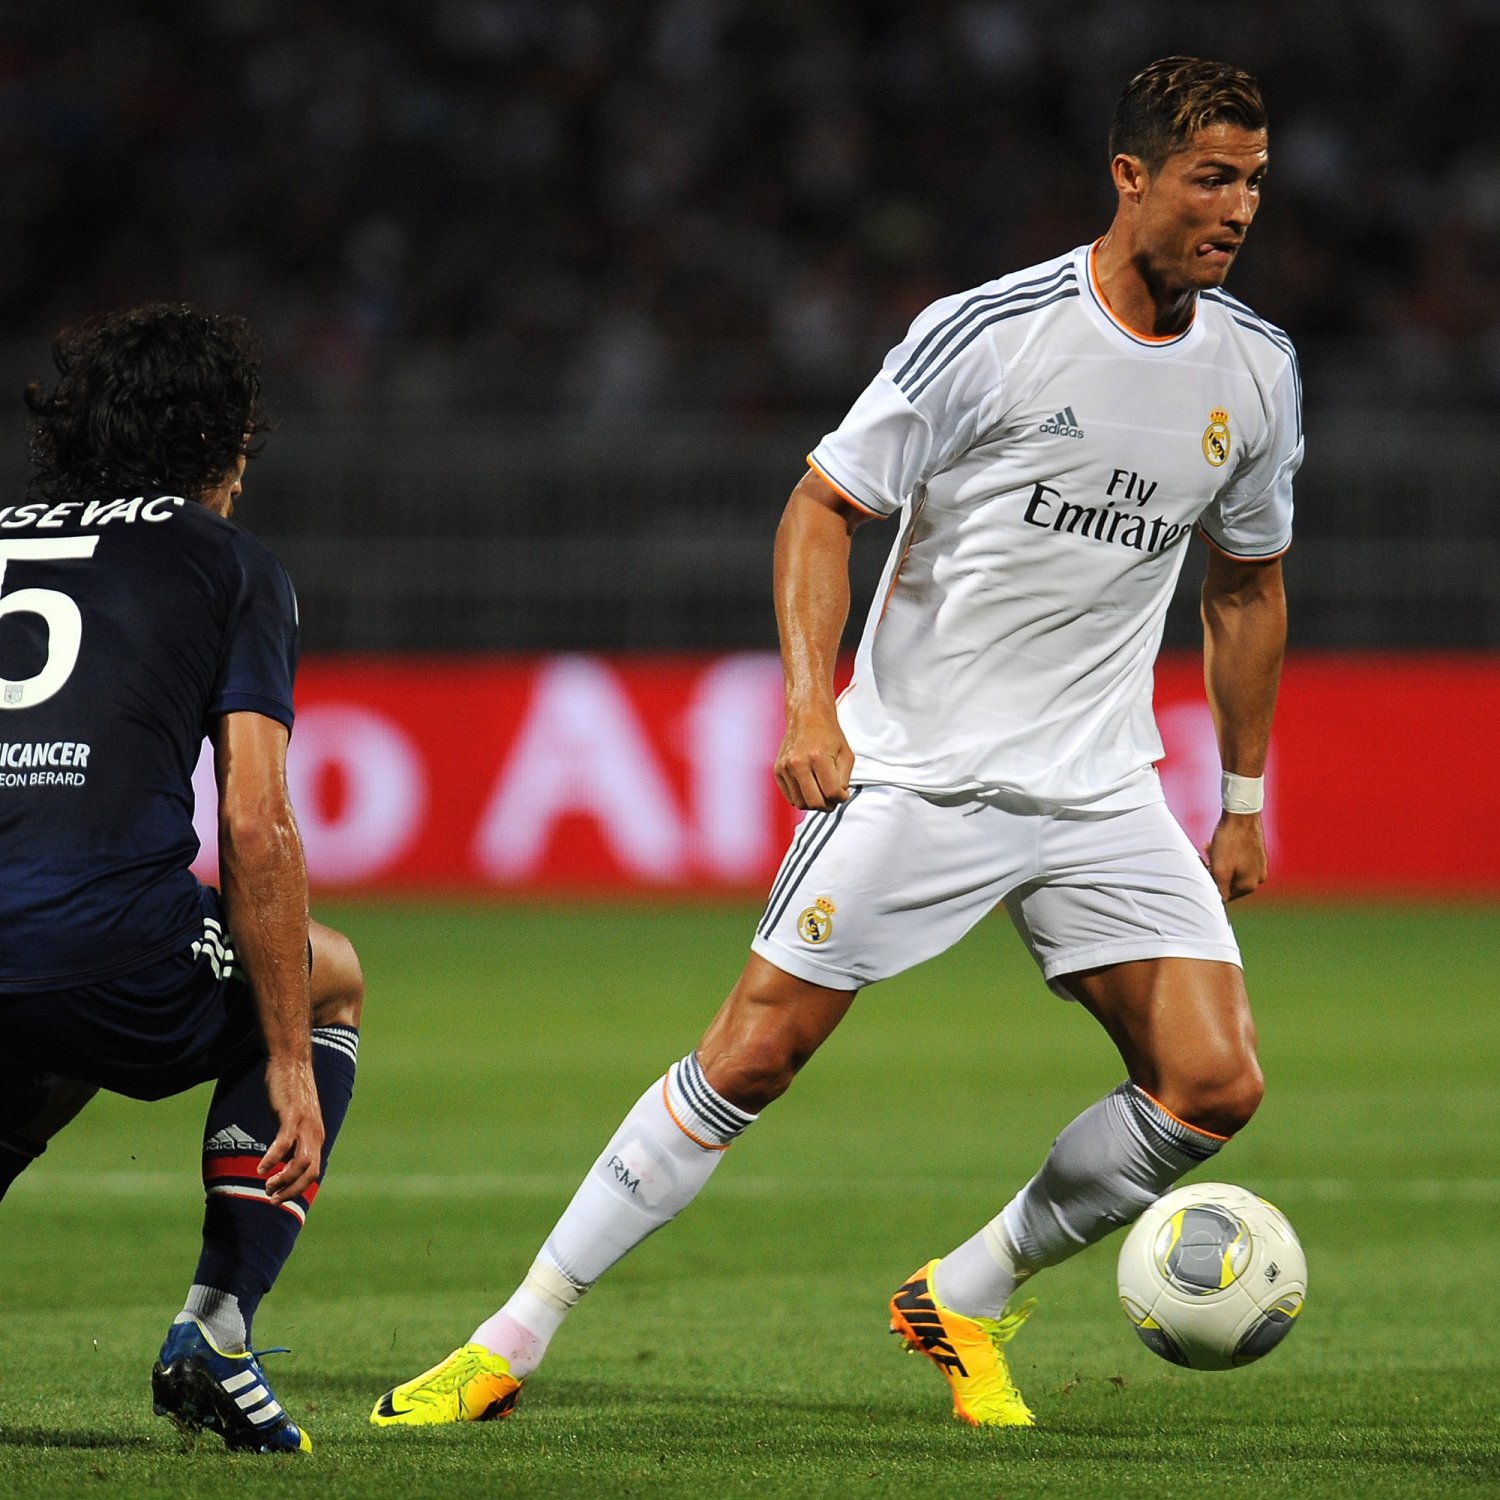 Real Madrid vs. PSG: Date, Time, Live Stream, TV Info and Preview | Bleacher Report